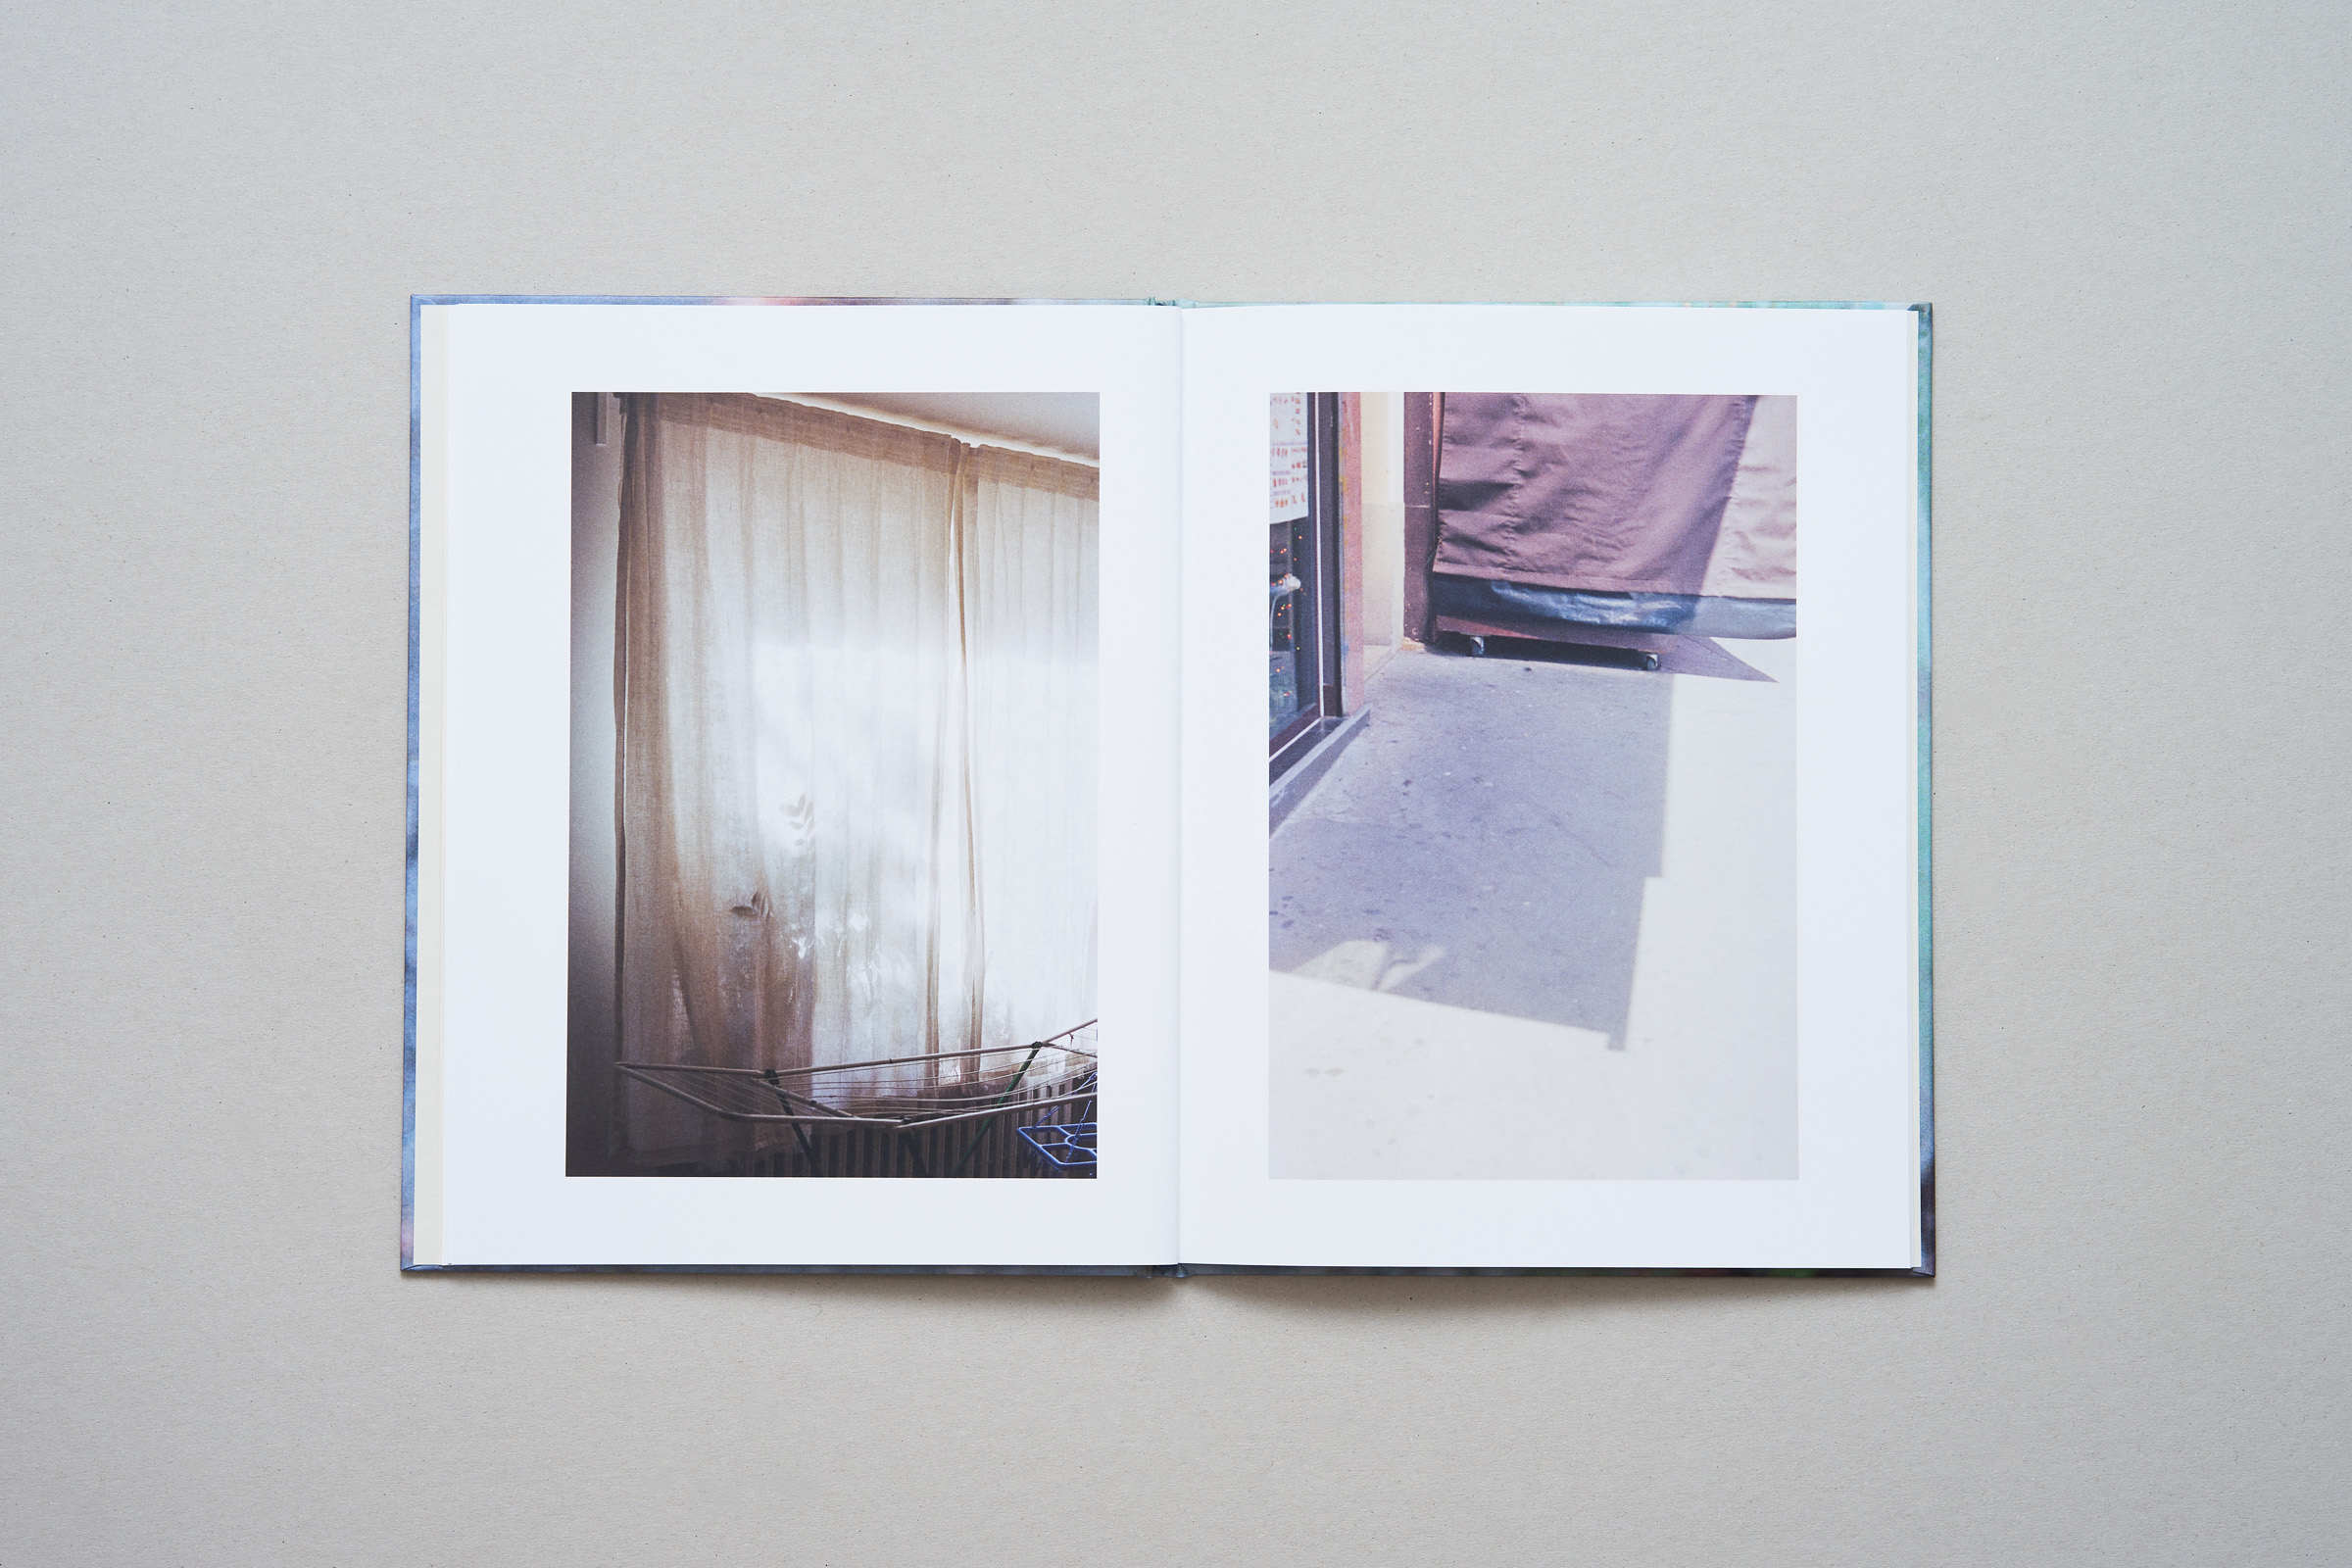 Ola Rindal — Notes on Ordinary Spaces